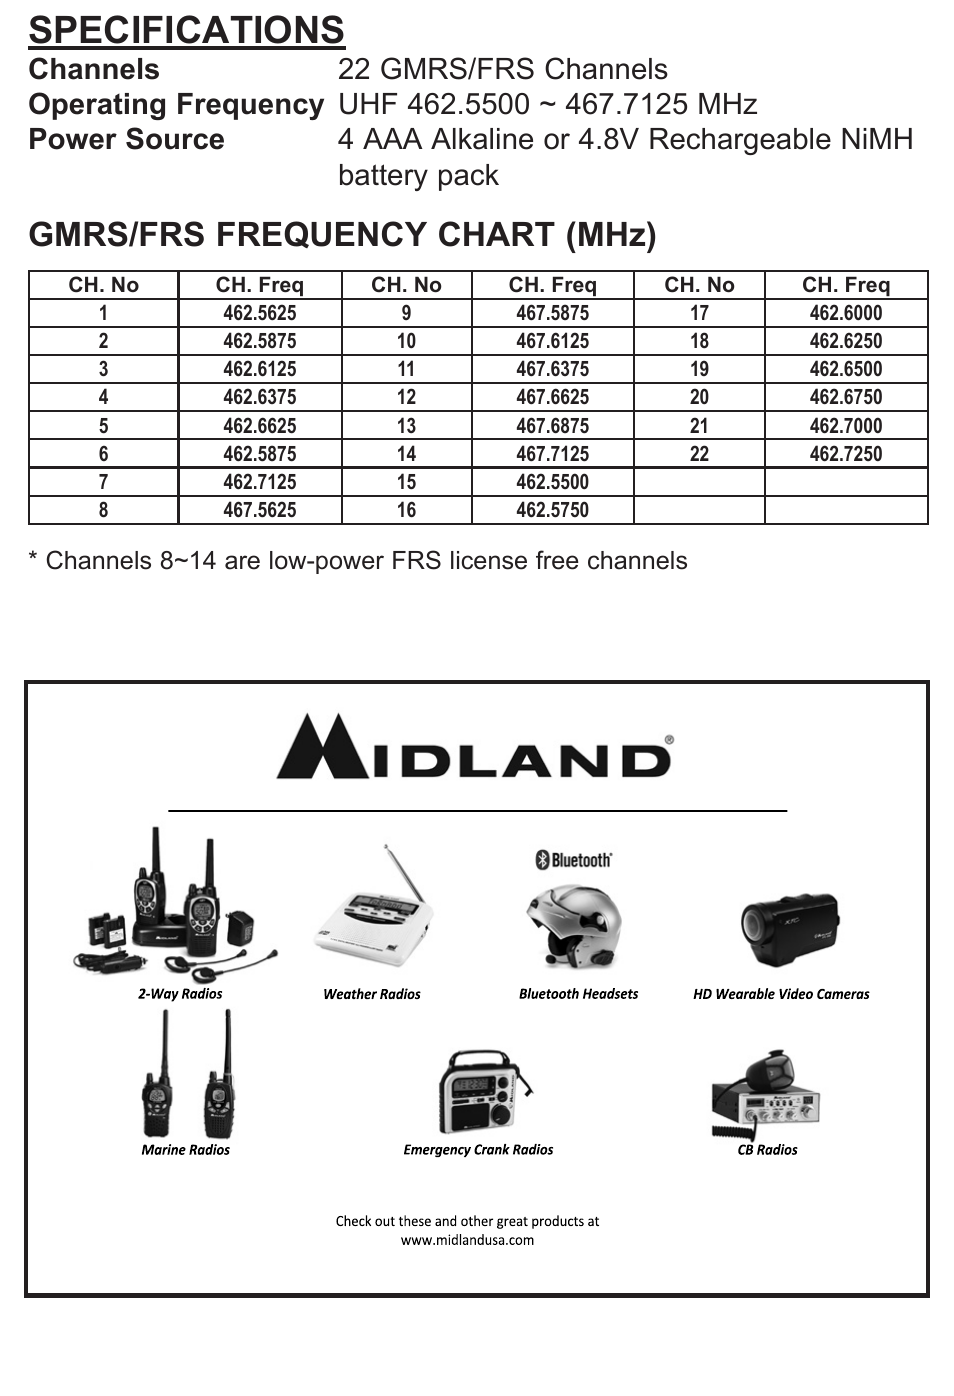 Frs Frequency Chart